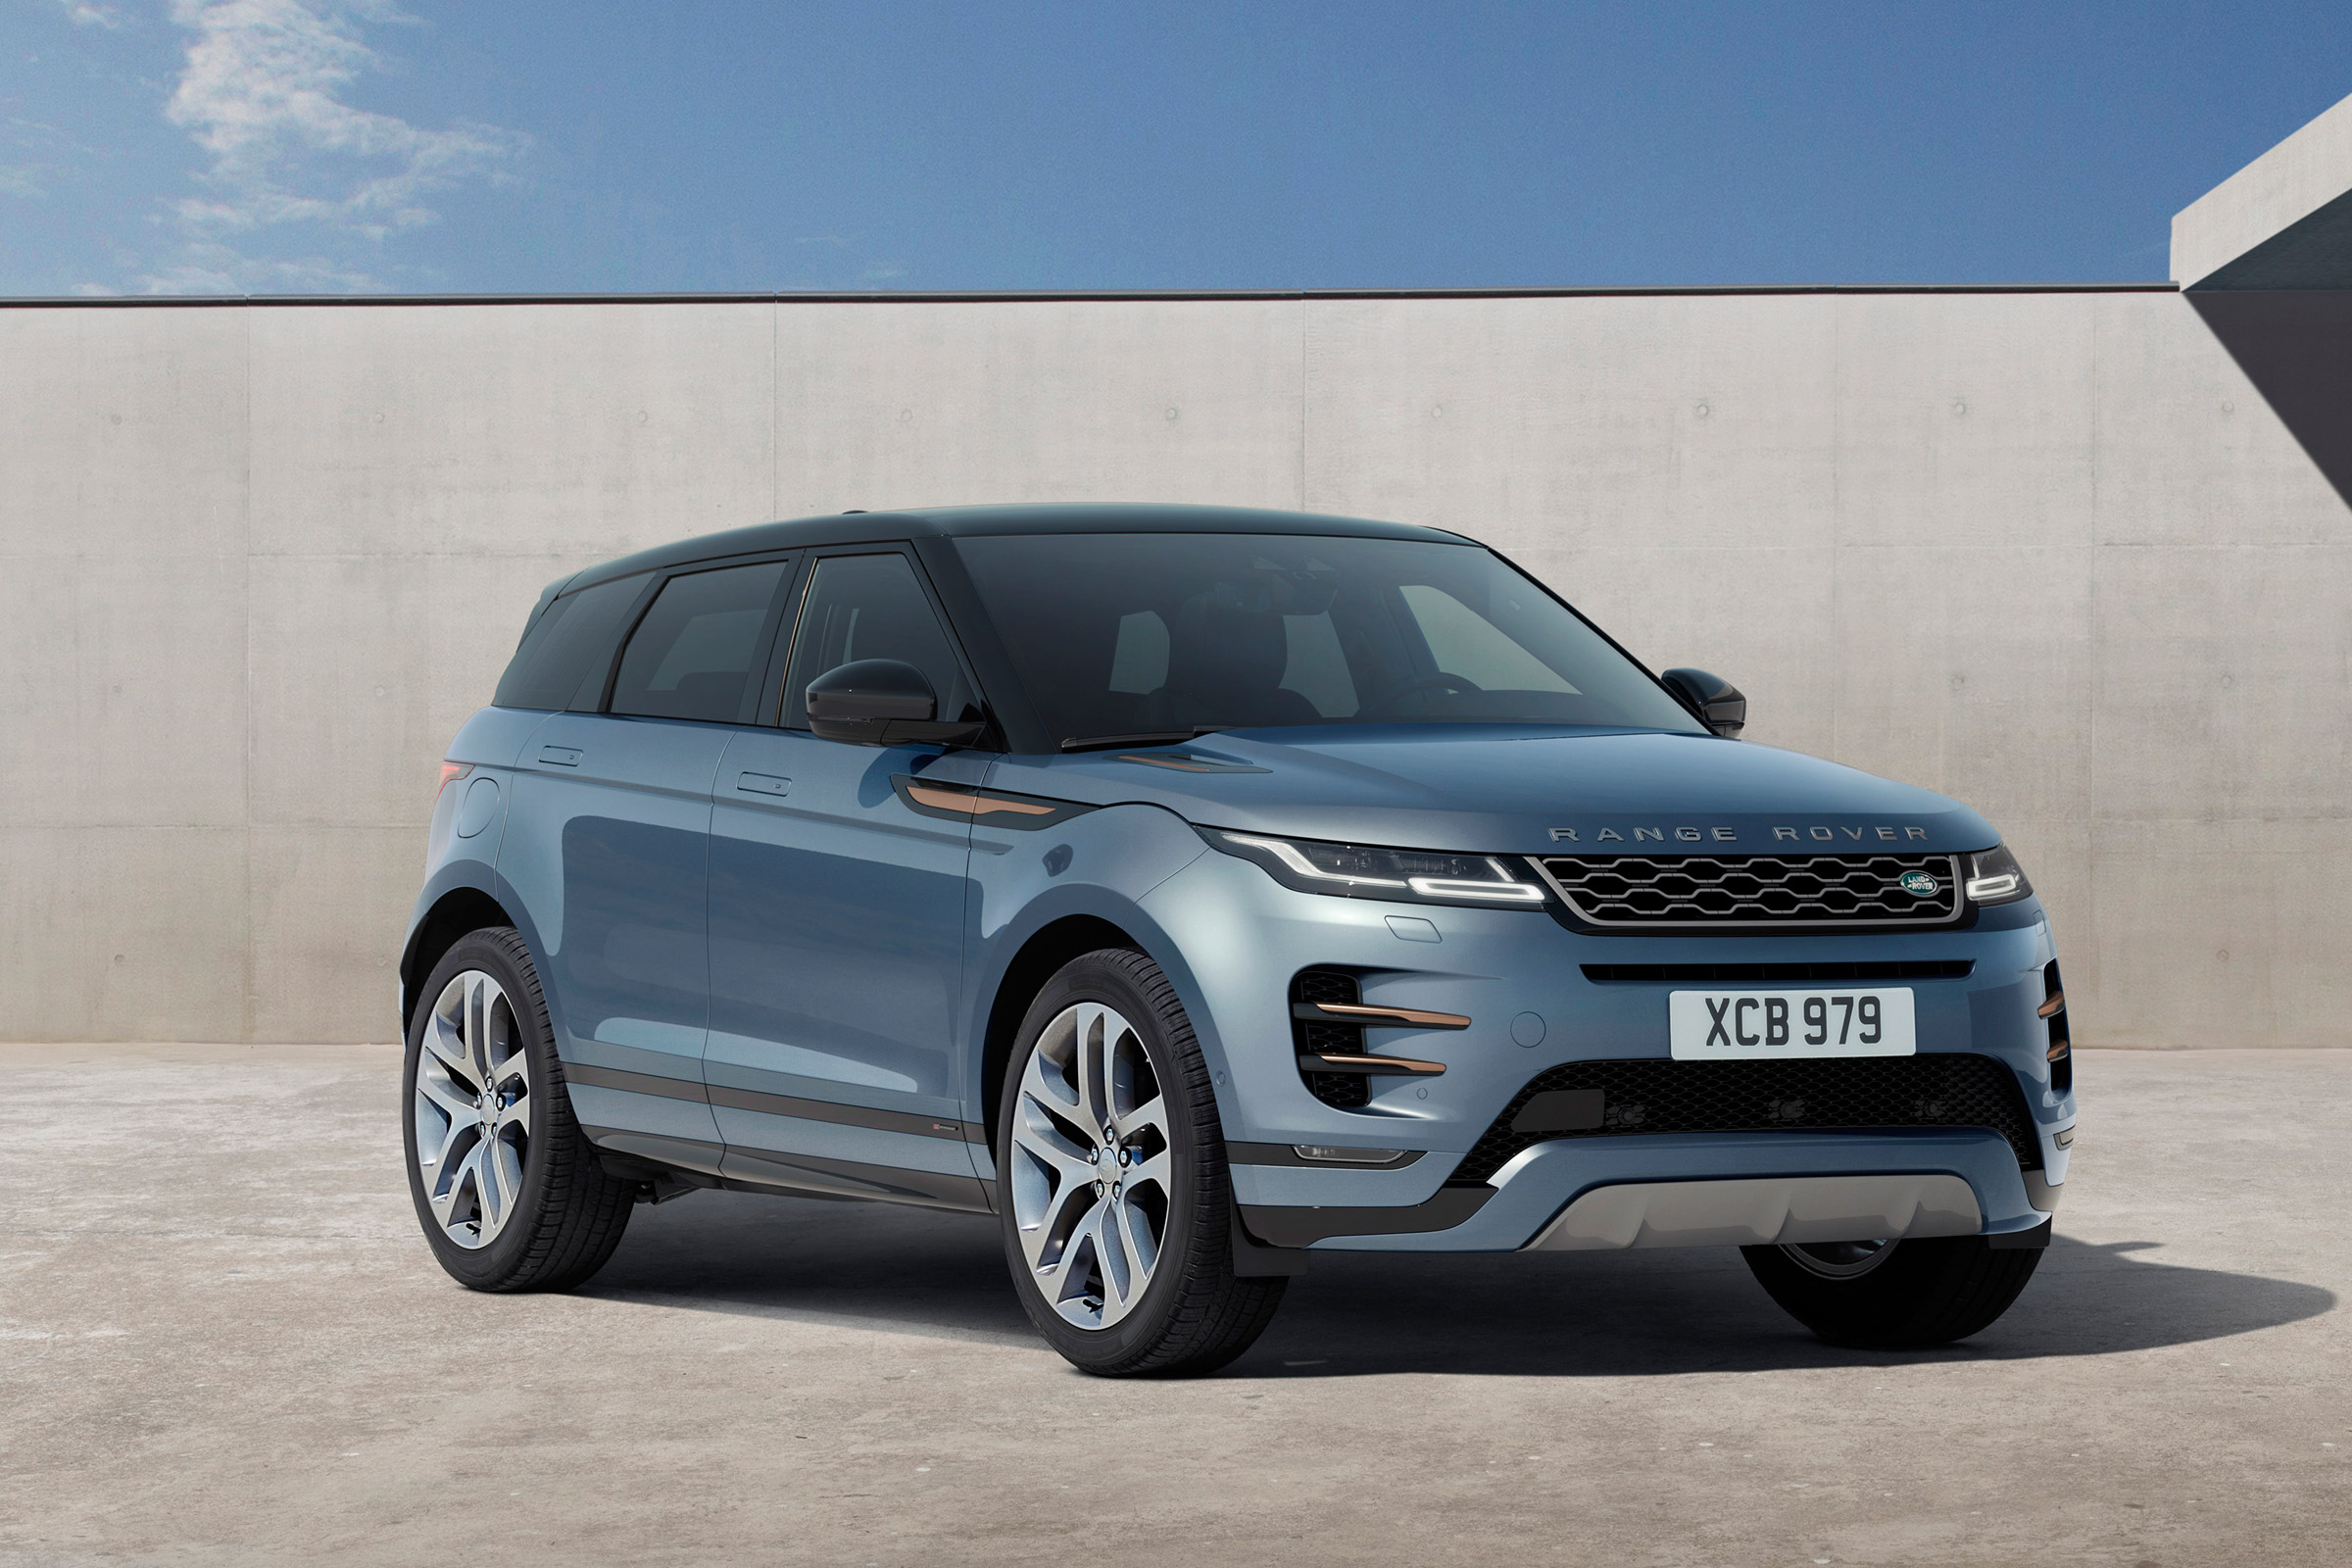 New 2019 Range Rover Evoque on sale now: prices, specs and full details